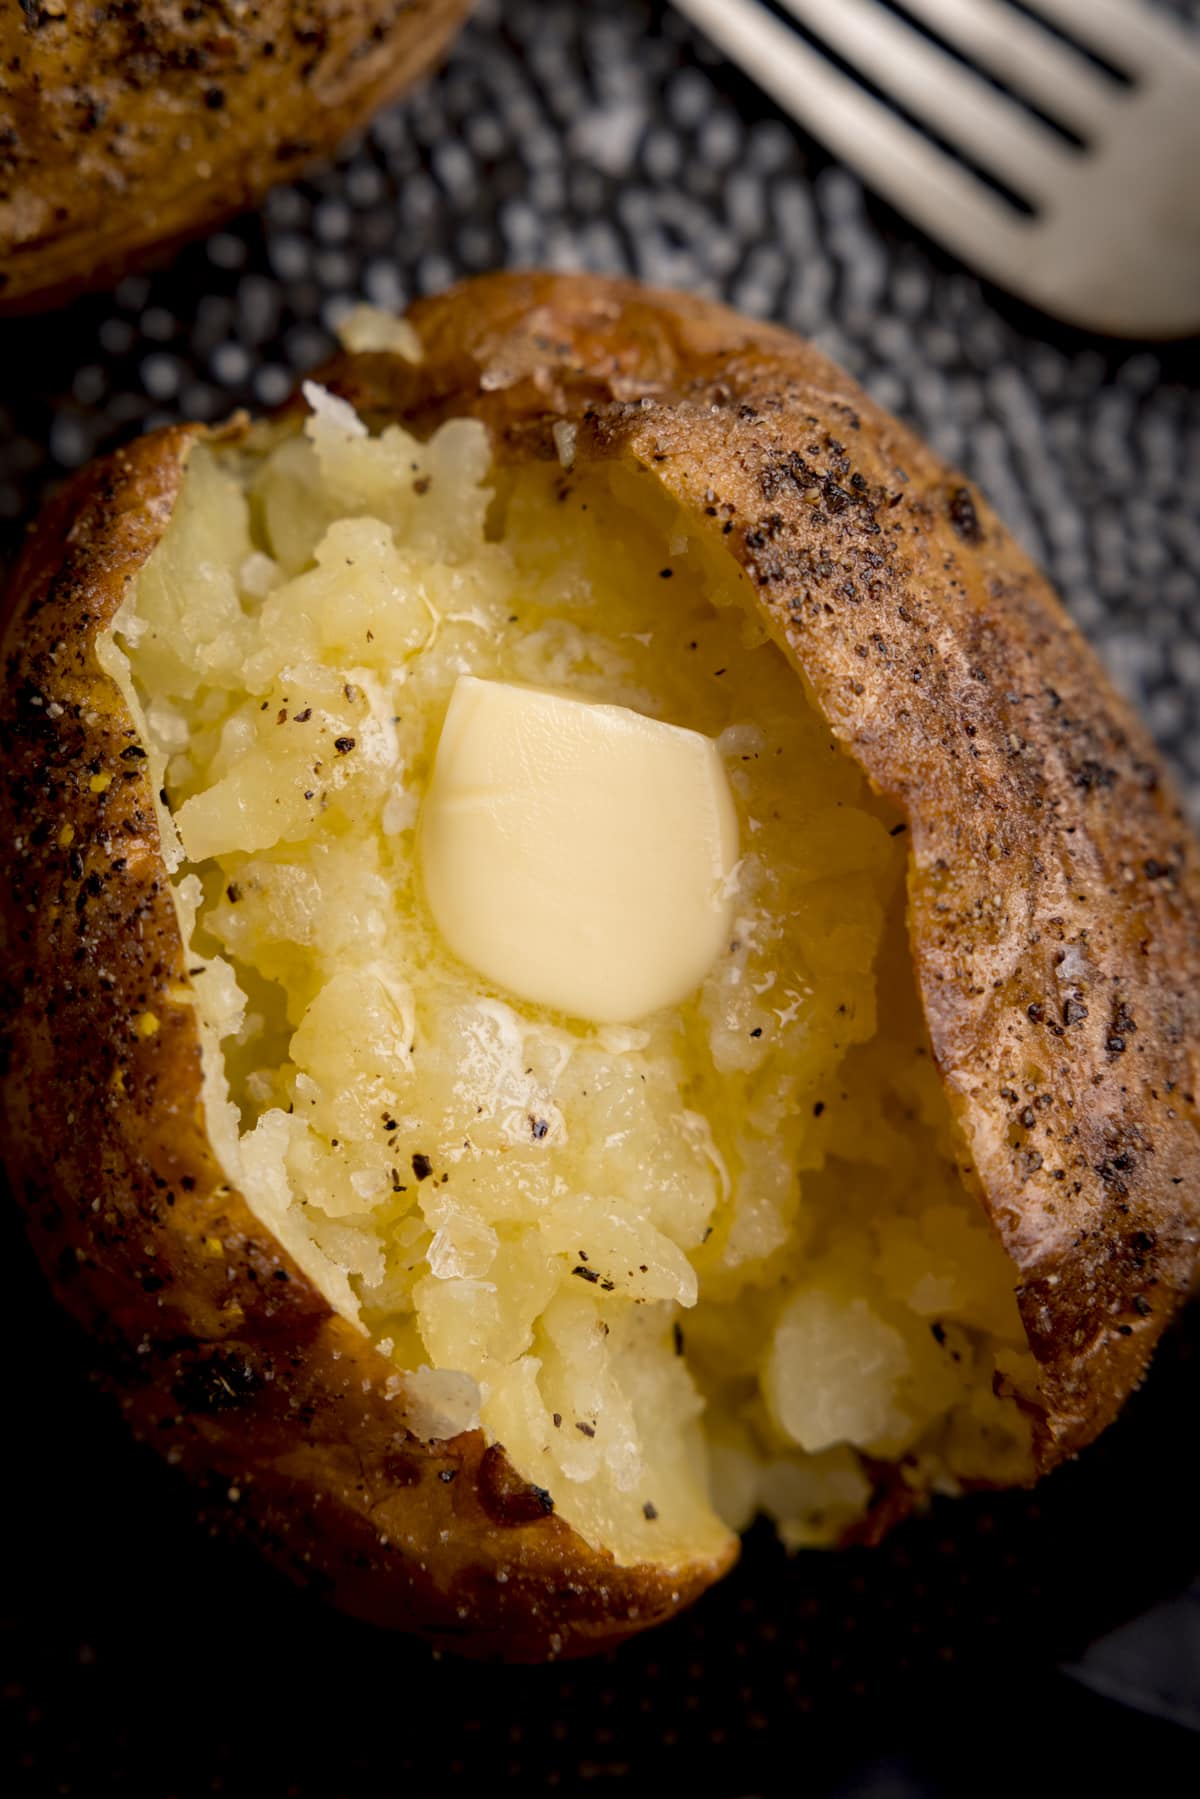 Overhead close-up image of a seasoned baked potato, sliced down the middle. The inside of the potato has been fluffed and there's a knob of melting butter inside. The potato is on a black textured plate. There is a silver fork just in view at the top right of the frame.